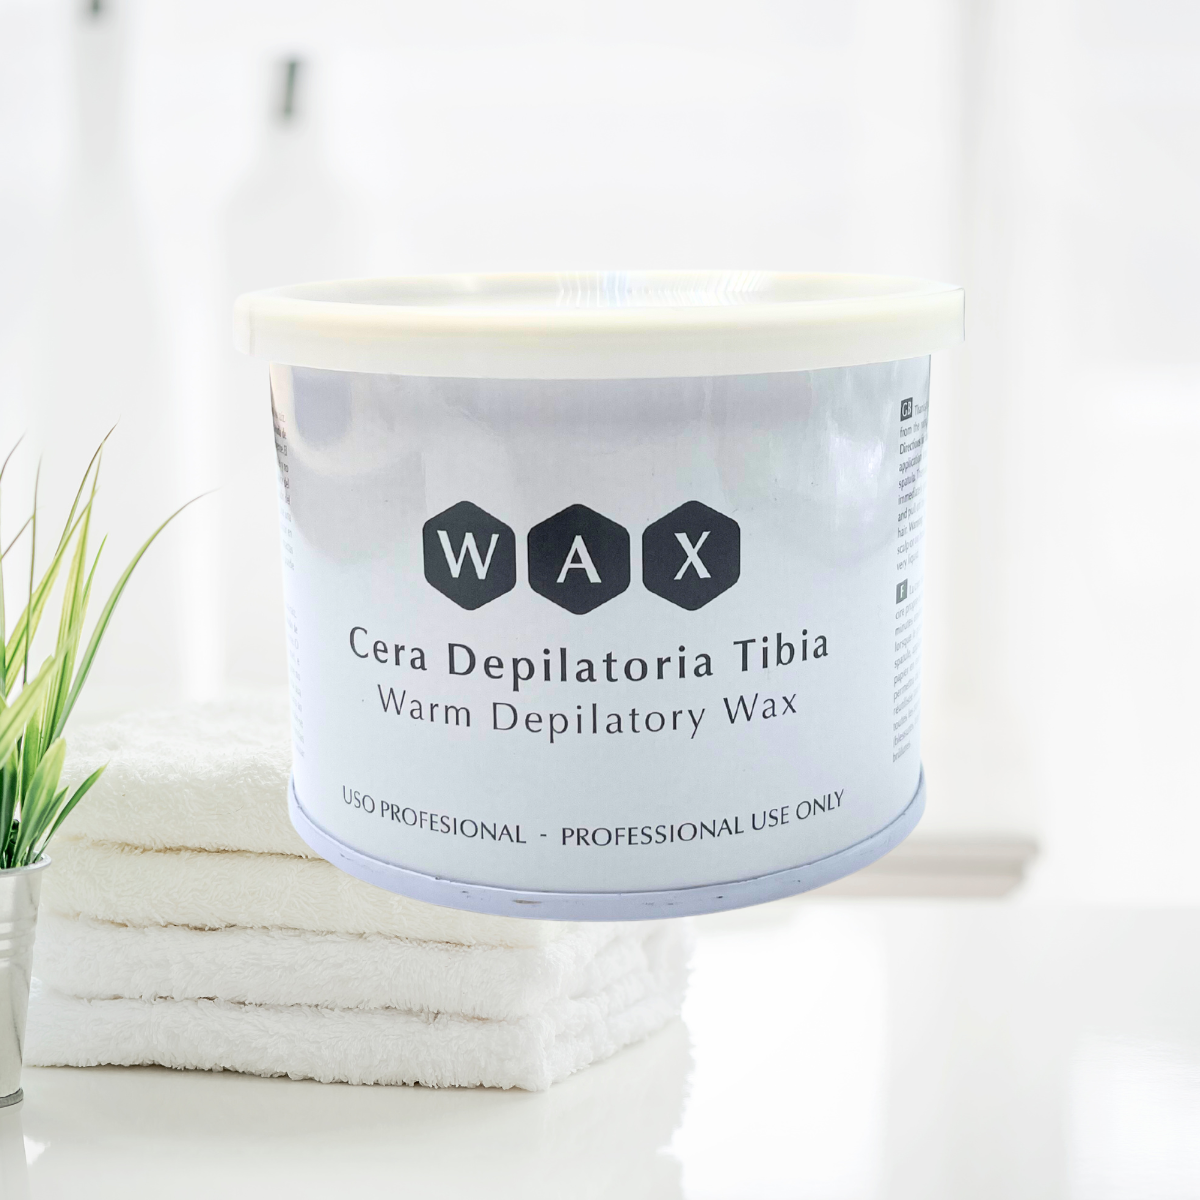 Depilcompany Soft Wax Natural Can - 14 oz. (24 Units Offer) - Buy professional cosmetics dedicated to hair removal